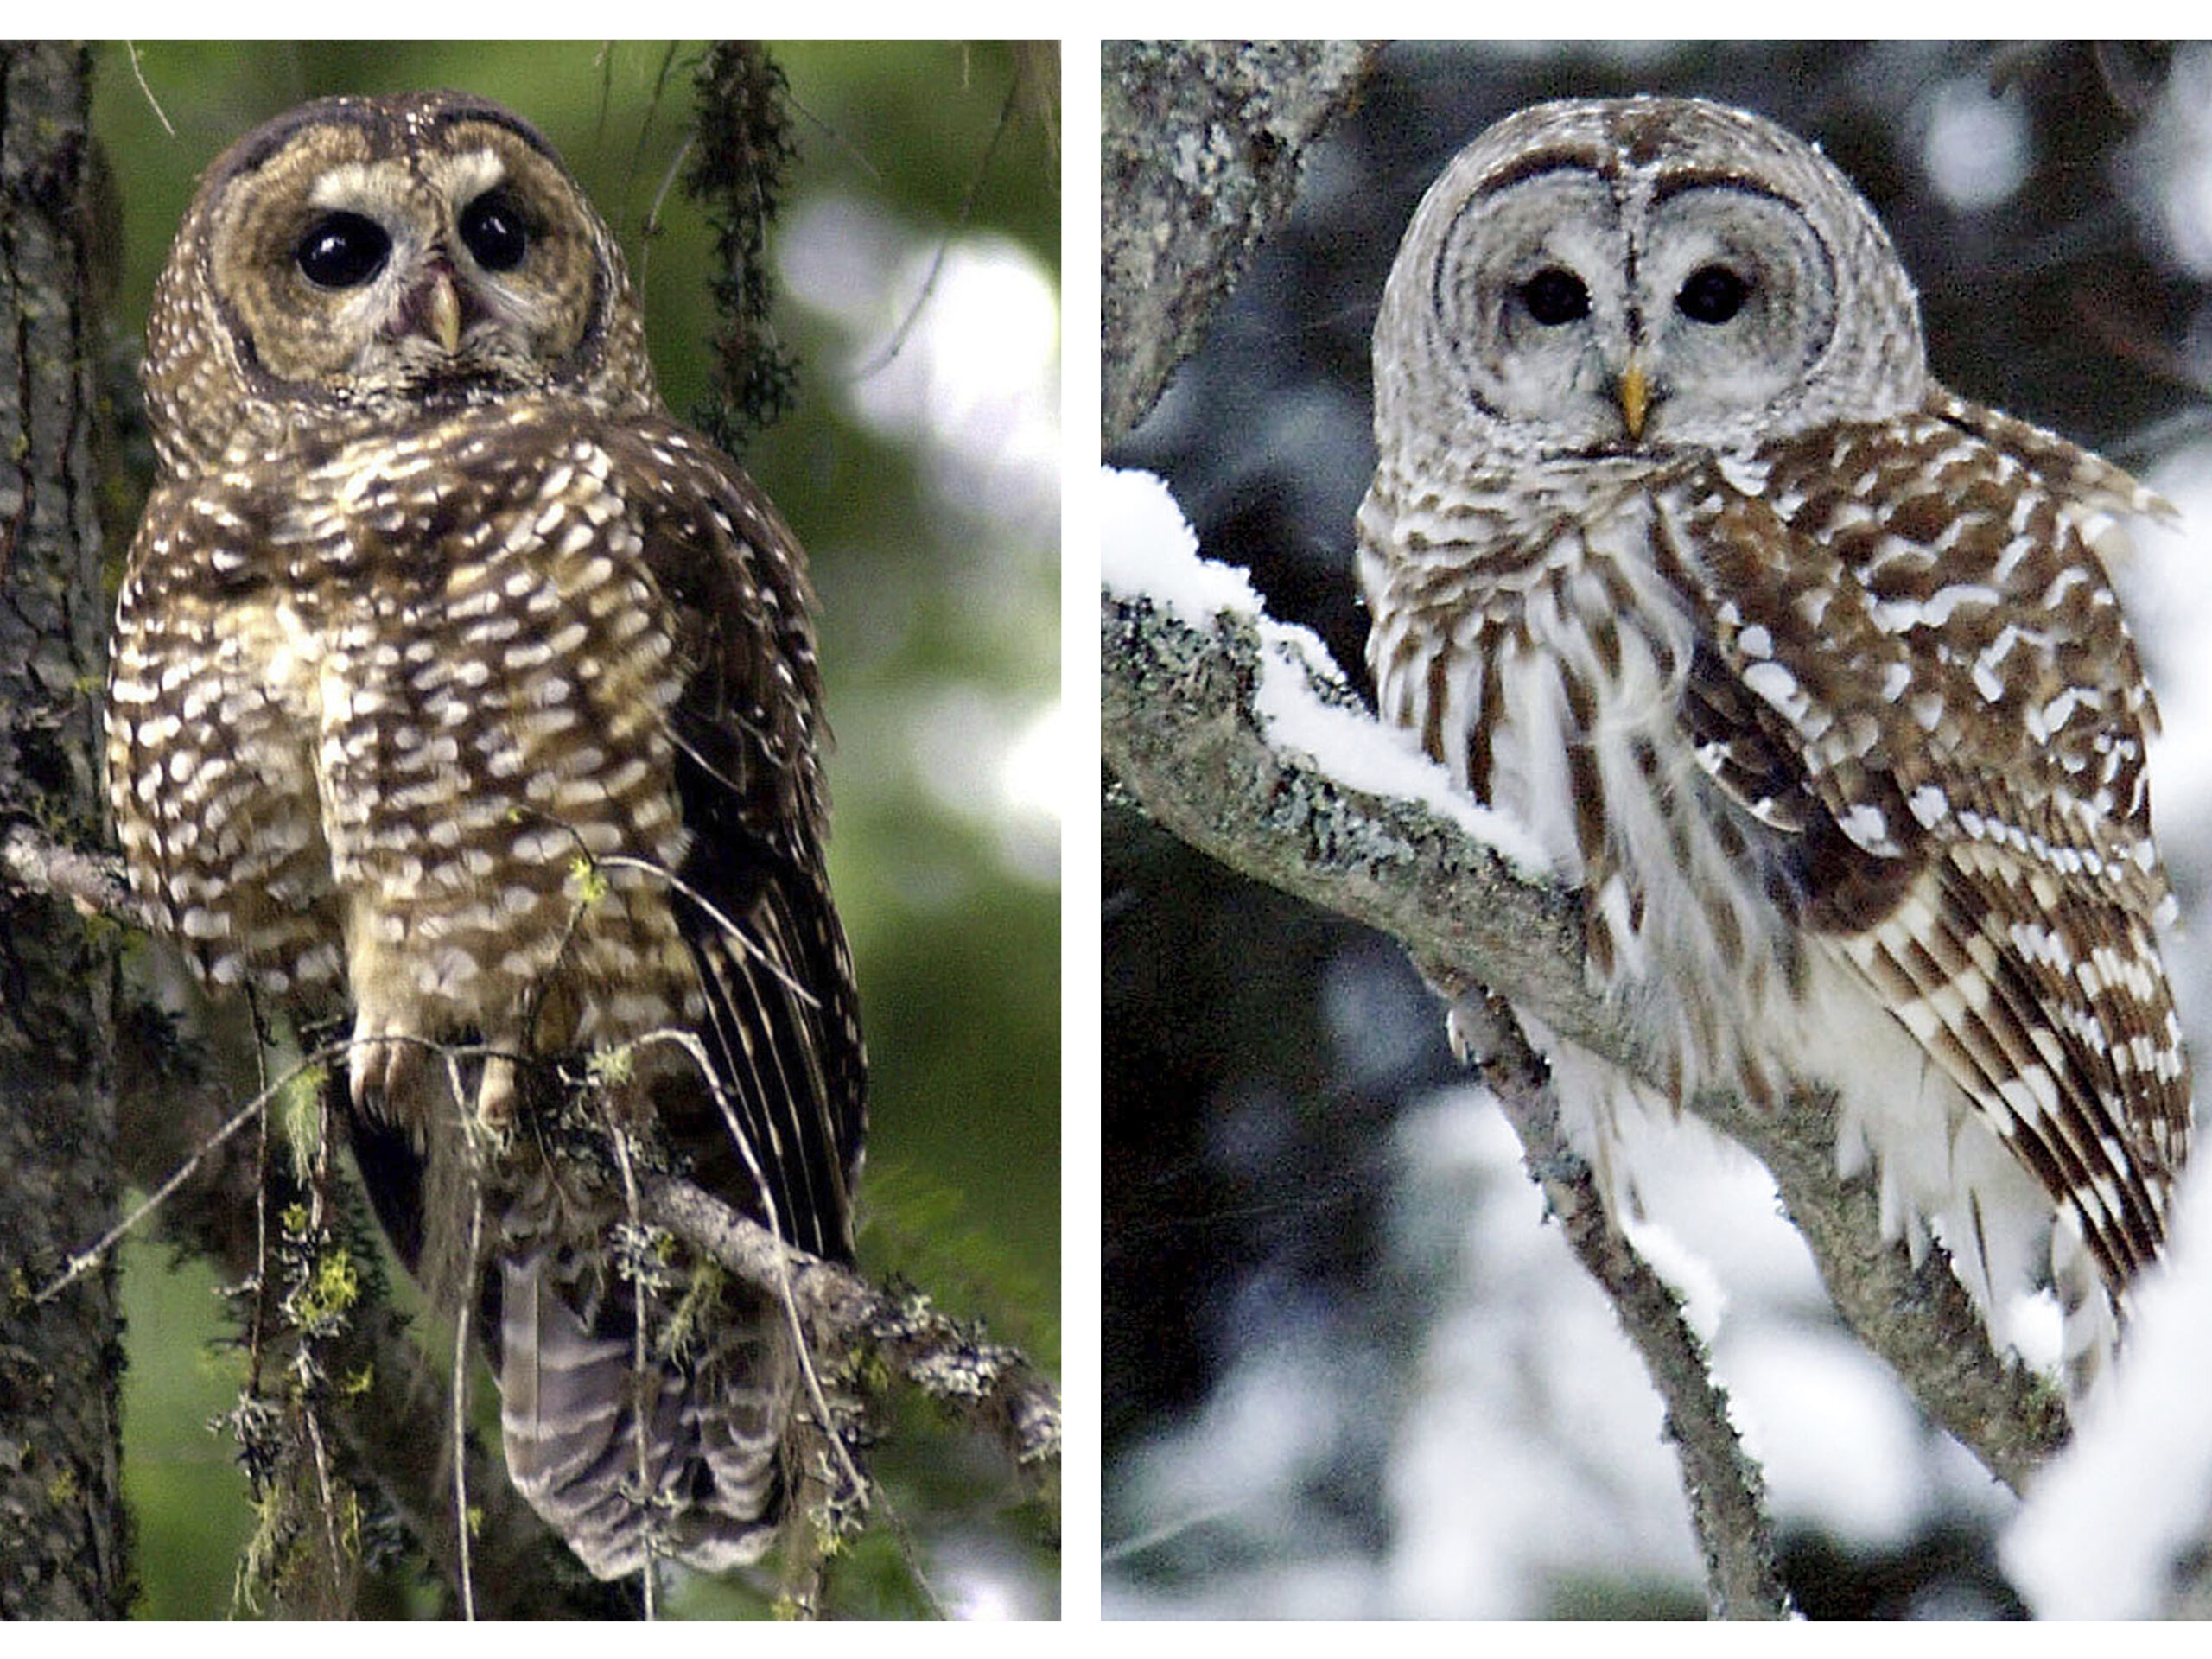 A government proposal to kill a half-million owls sparks controversy